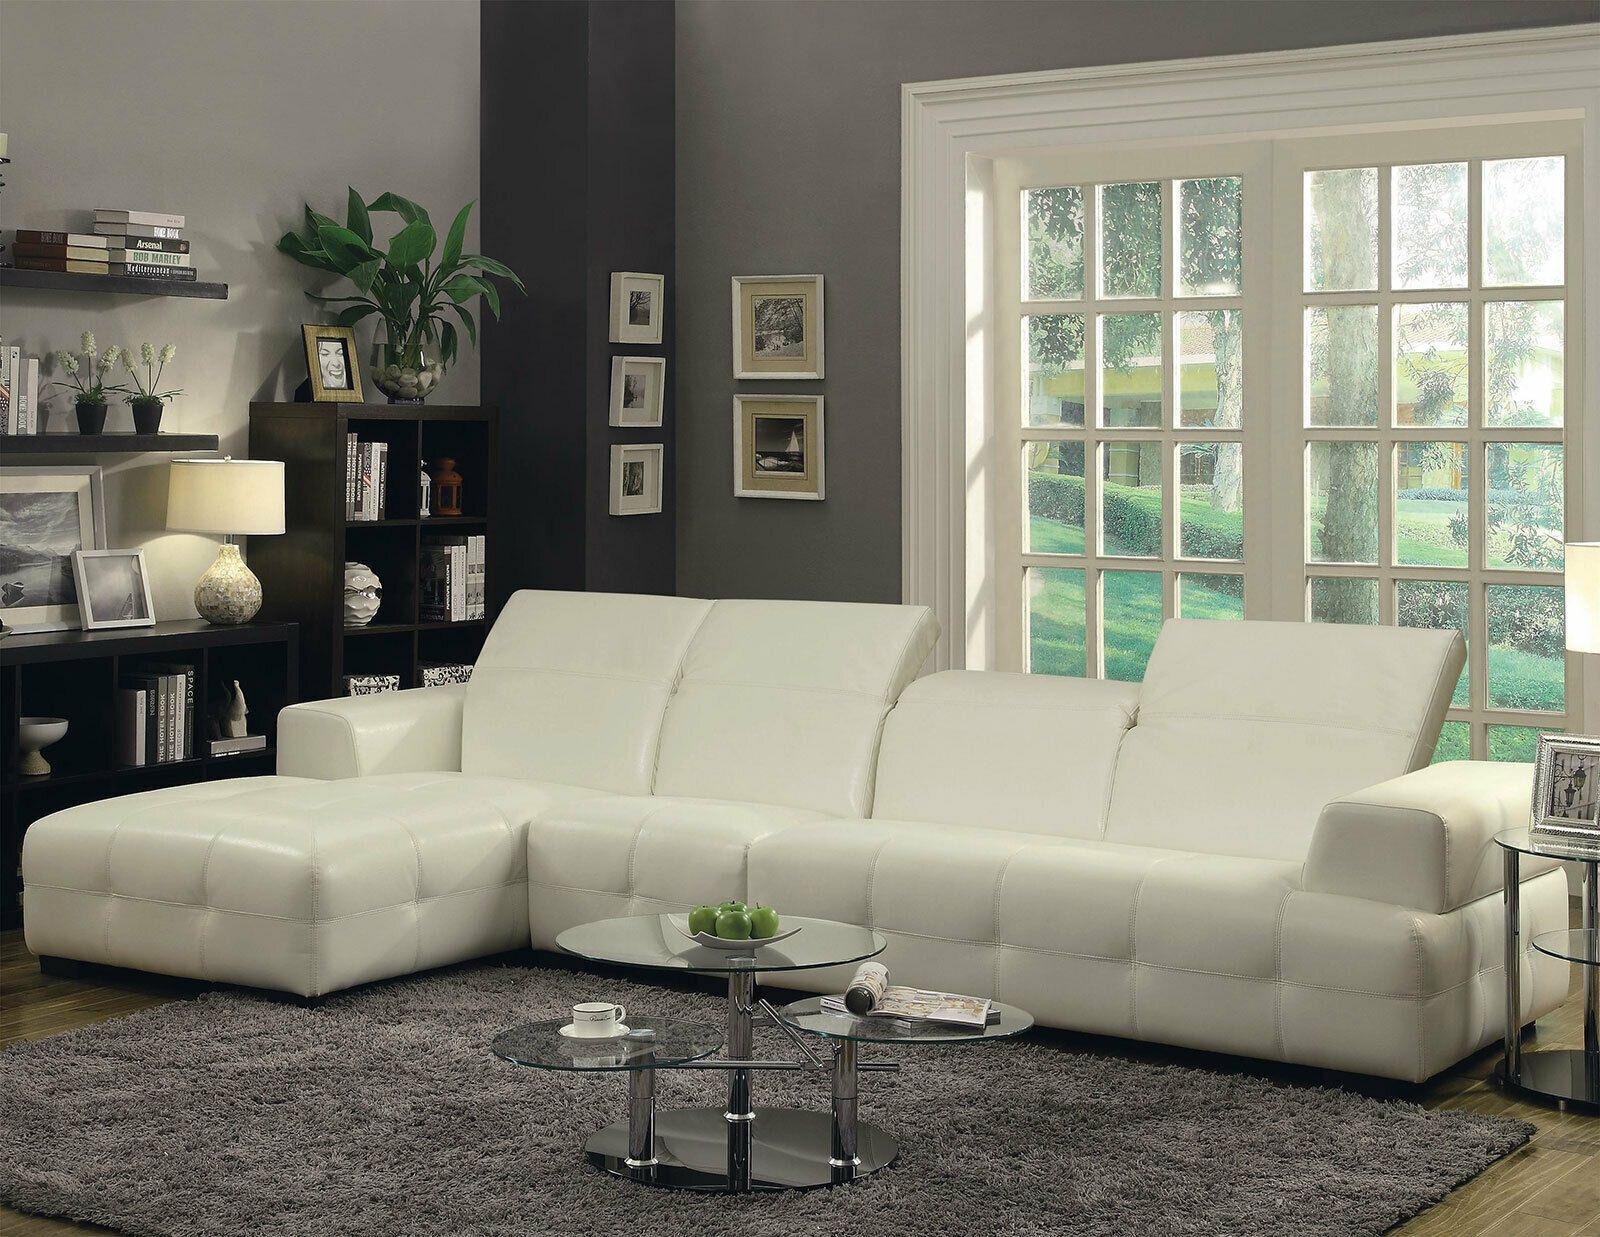 Amara Contemporary Sectional Living Room Furniture White Faux Leather Within Faux Leather Sectional Sofa Sets (Gallery 15 of 21)